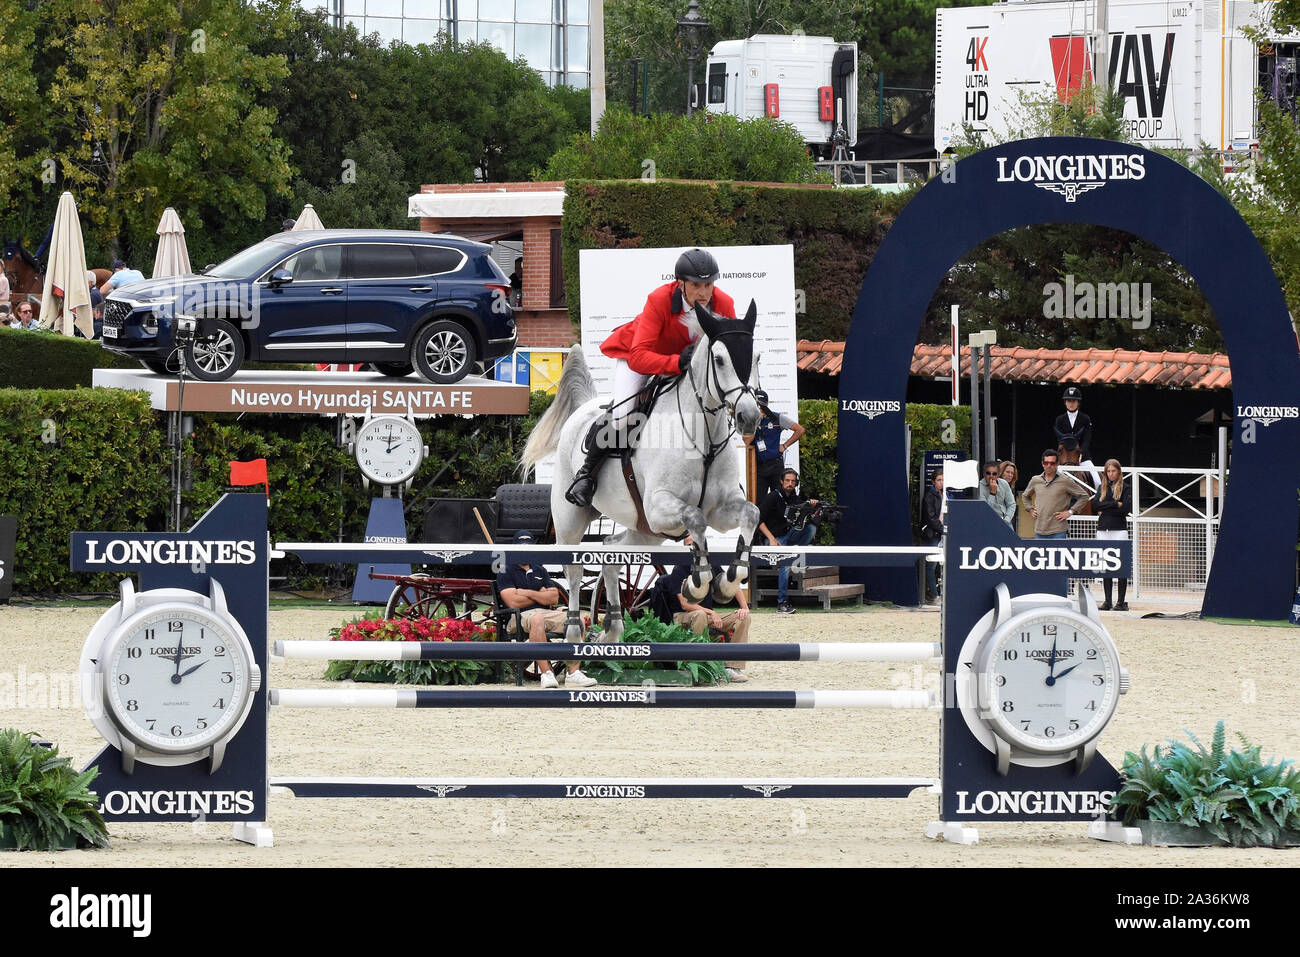 Barcelona, Spain. 05th Oct, 2019. Spanish professional rider Carlos Catalan participates during the Queen's Cup - Segura Widows Trophy Longines FEI Jumping Nations Cup Final in Barcelona. Credit: SOPA Images Limited/Alamy Live News Stock Photo